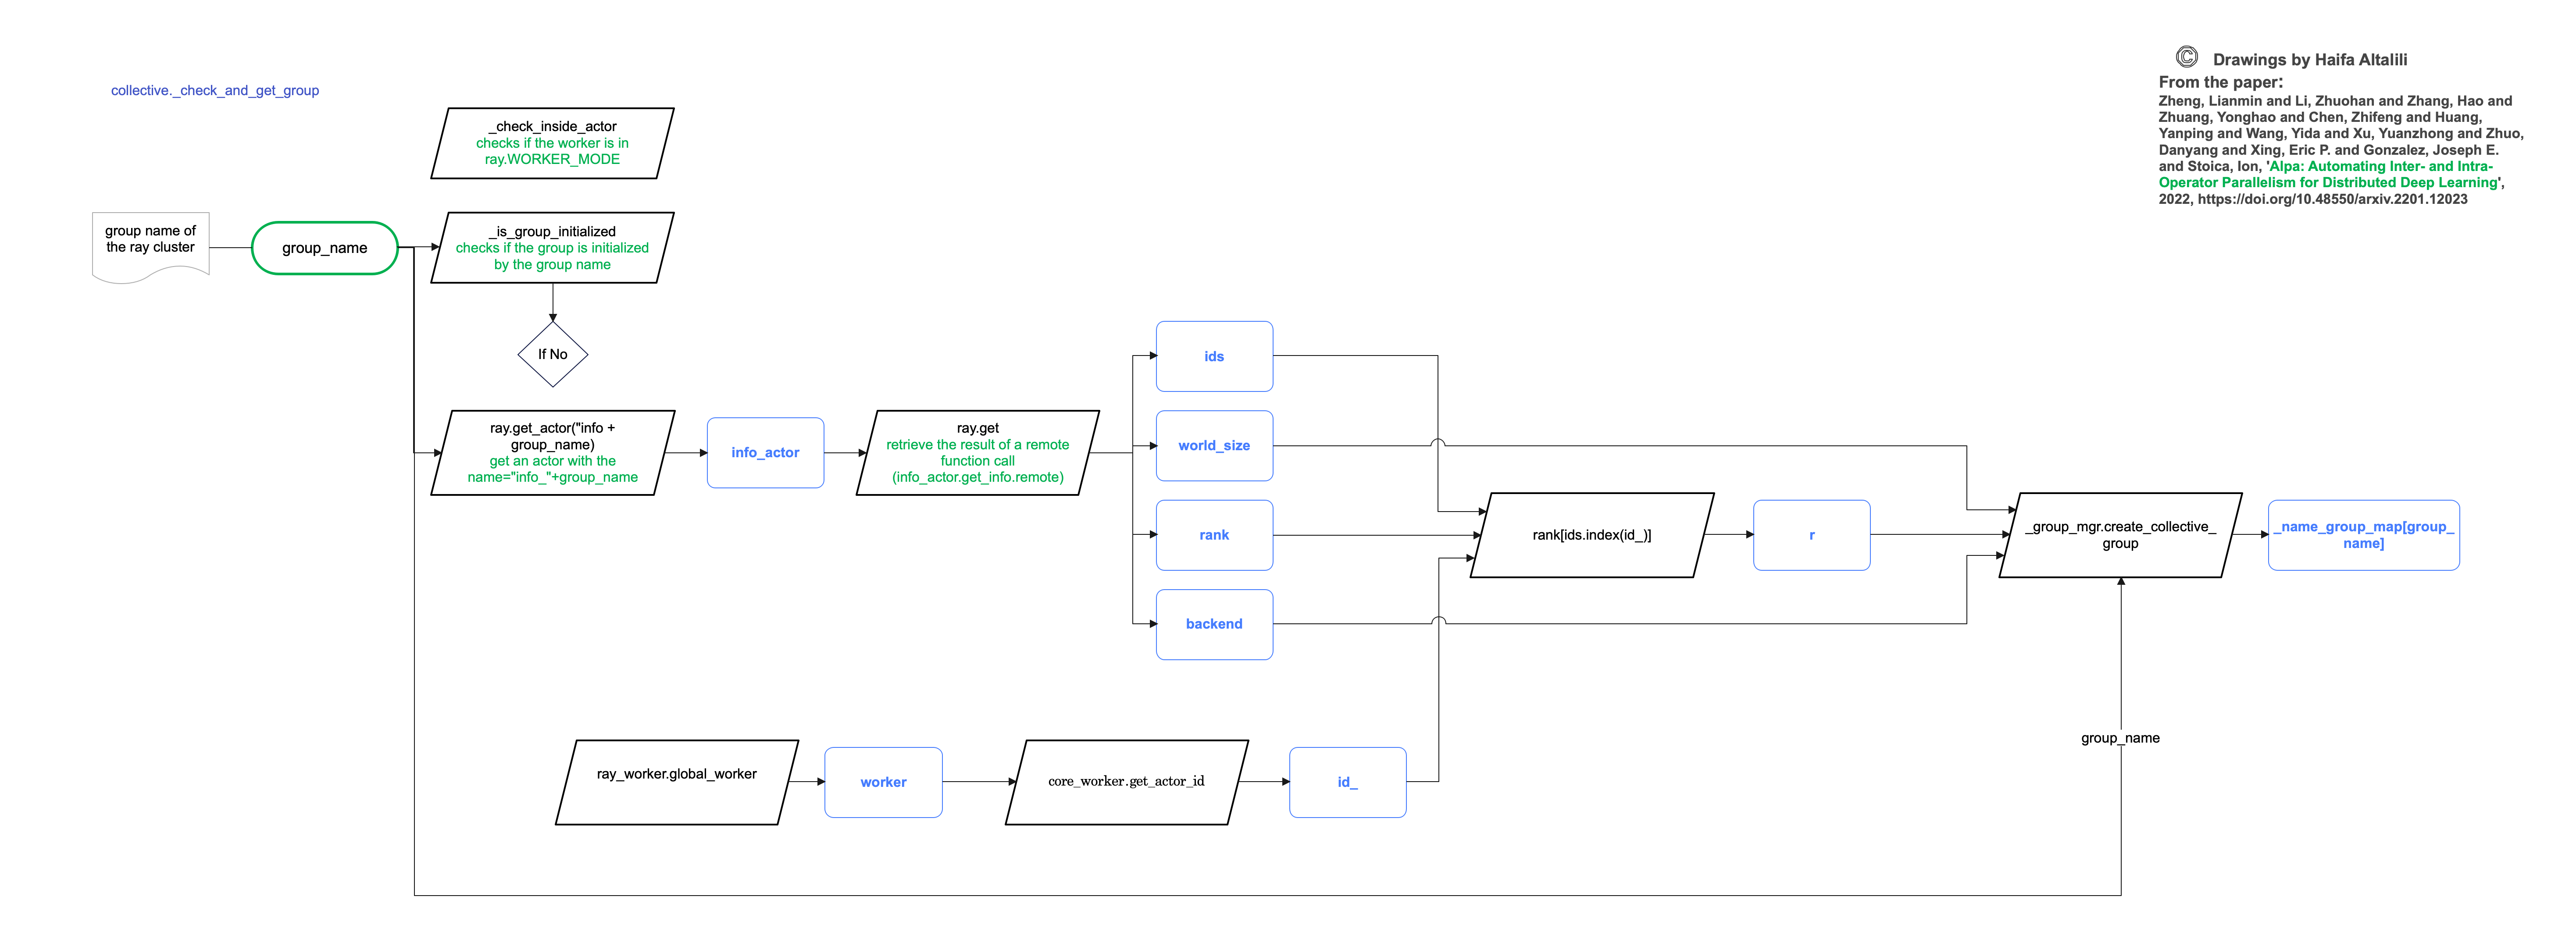 Event Flowchart for Distributed Deep Learning